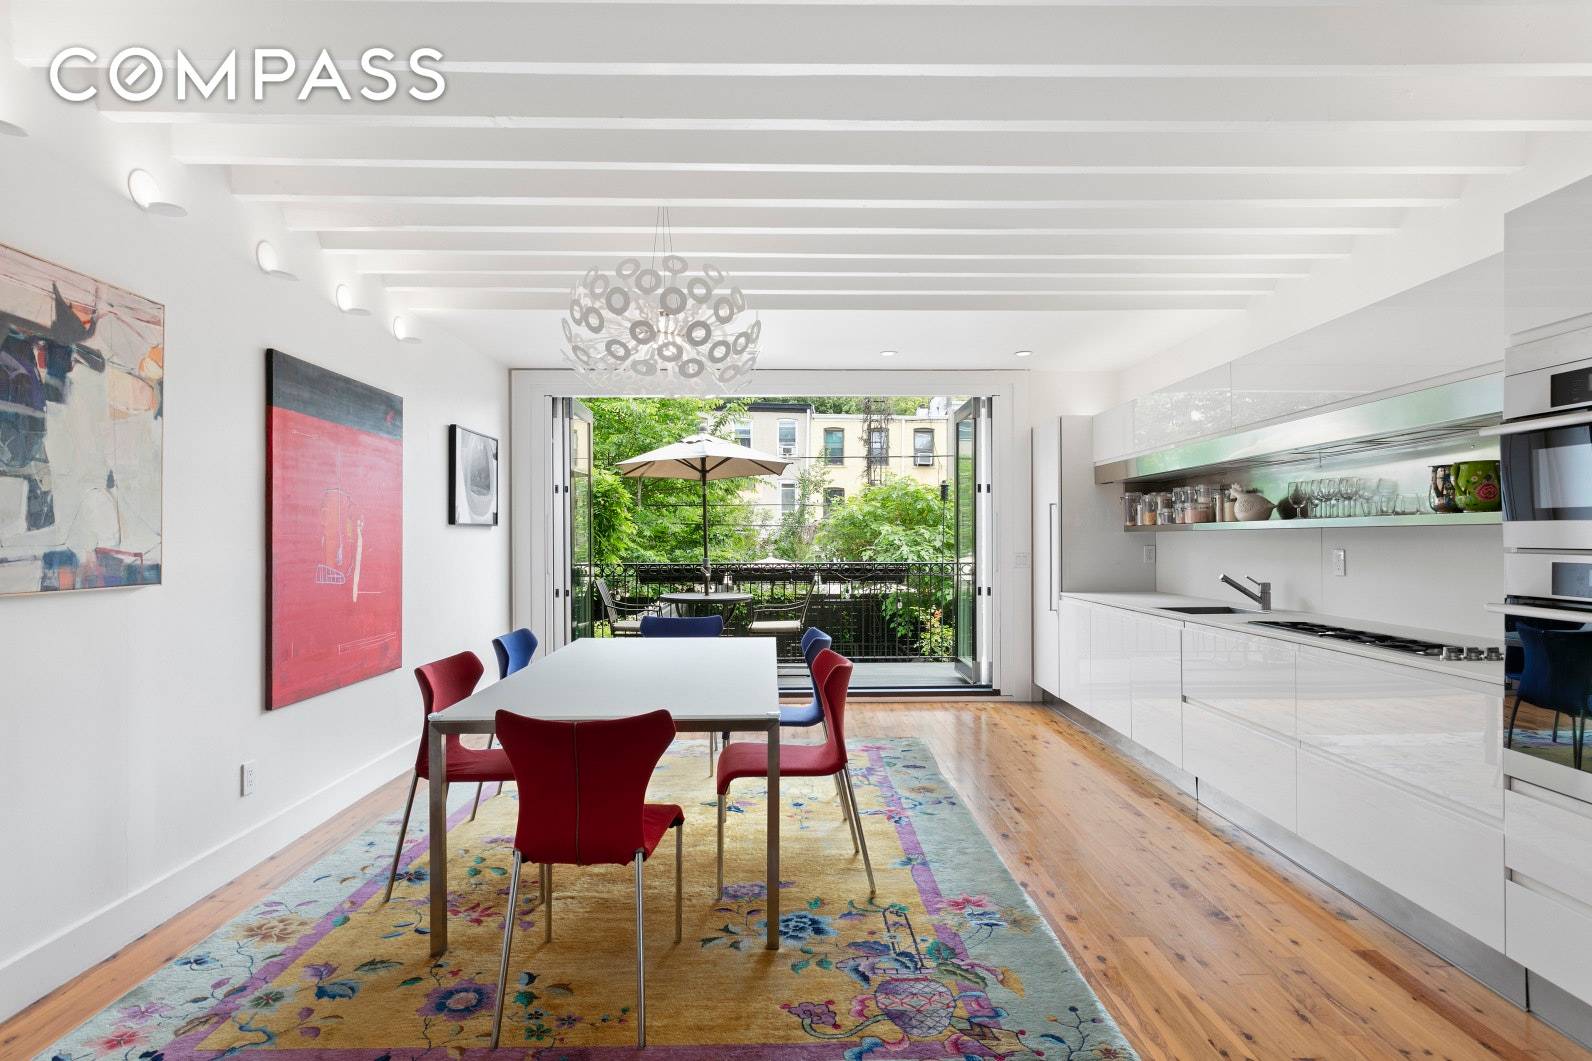 455A Sackett Street is located on a tree lined block in charming Carroll Gardens.